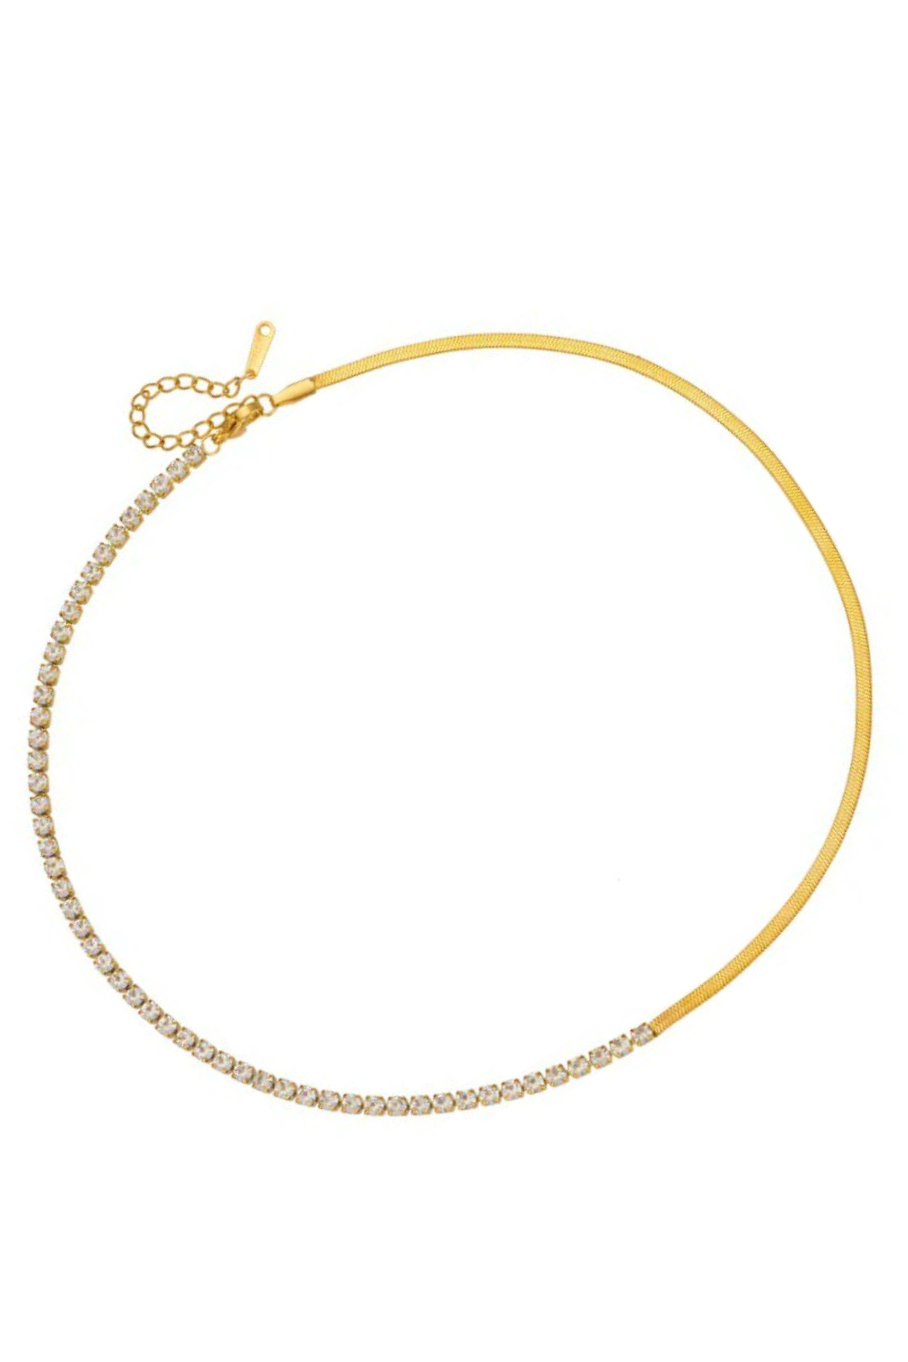 Snake Chain Classic Diamond Necklace - GOLD